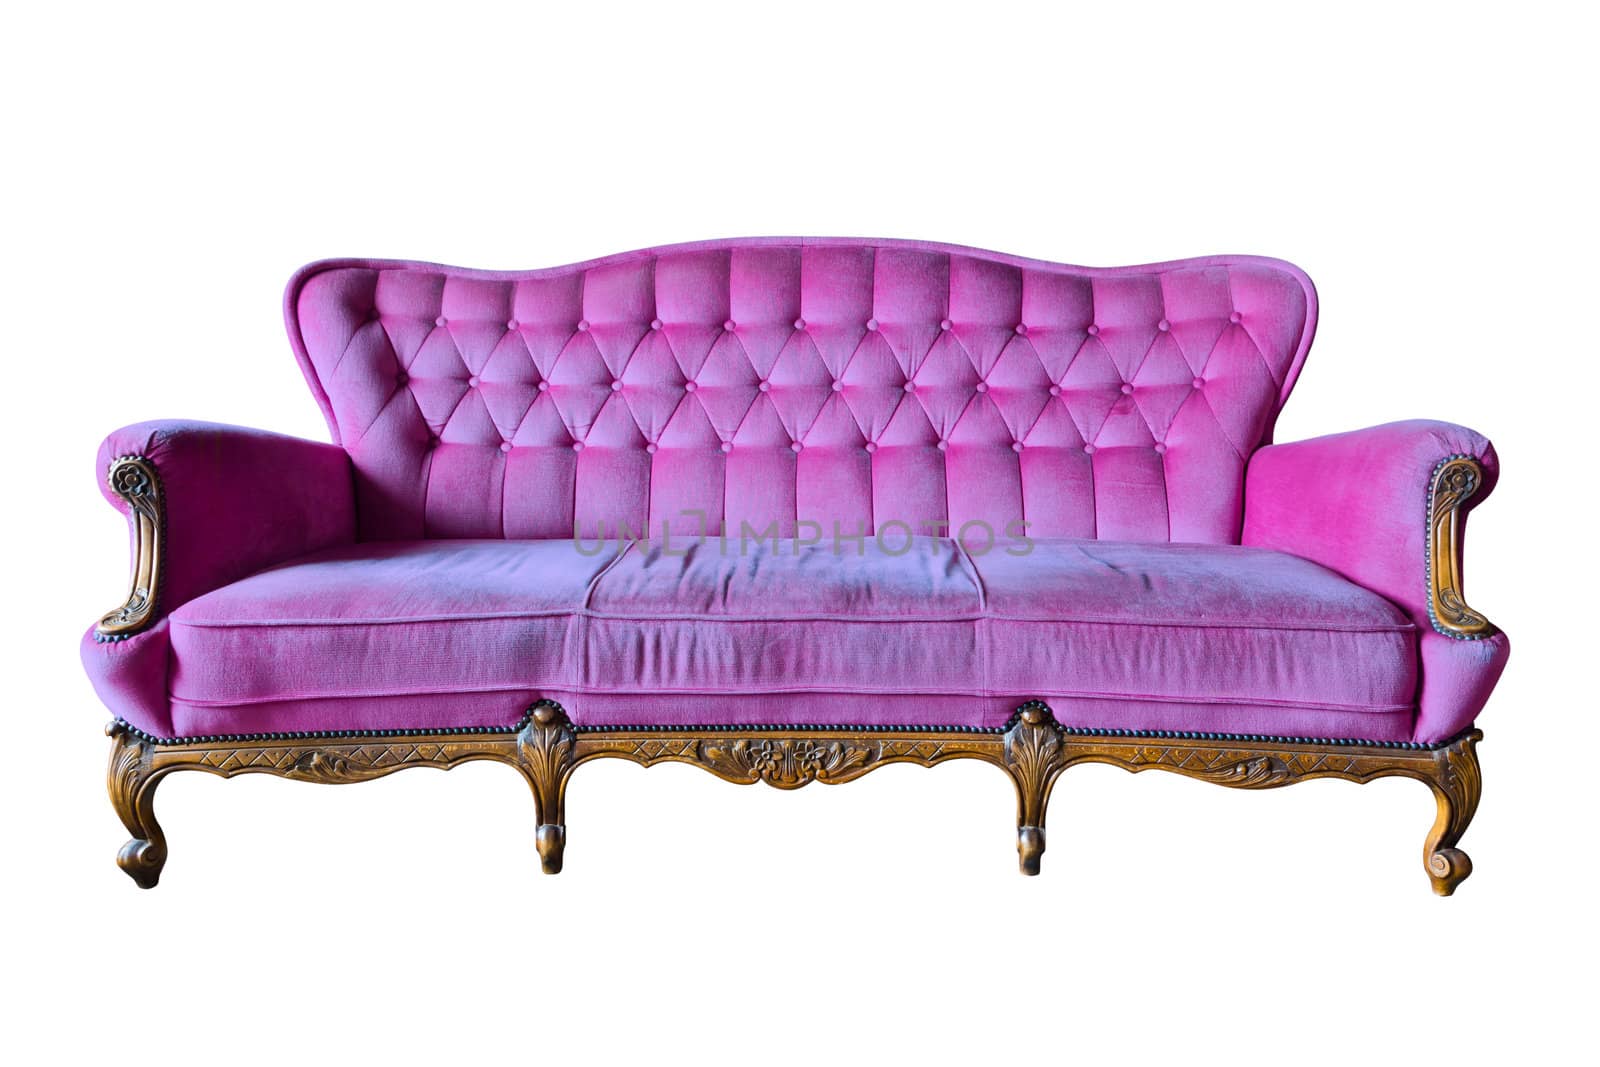 vintage pink luxury armchair isolated with clipping path by tungphoto